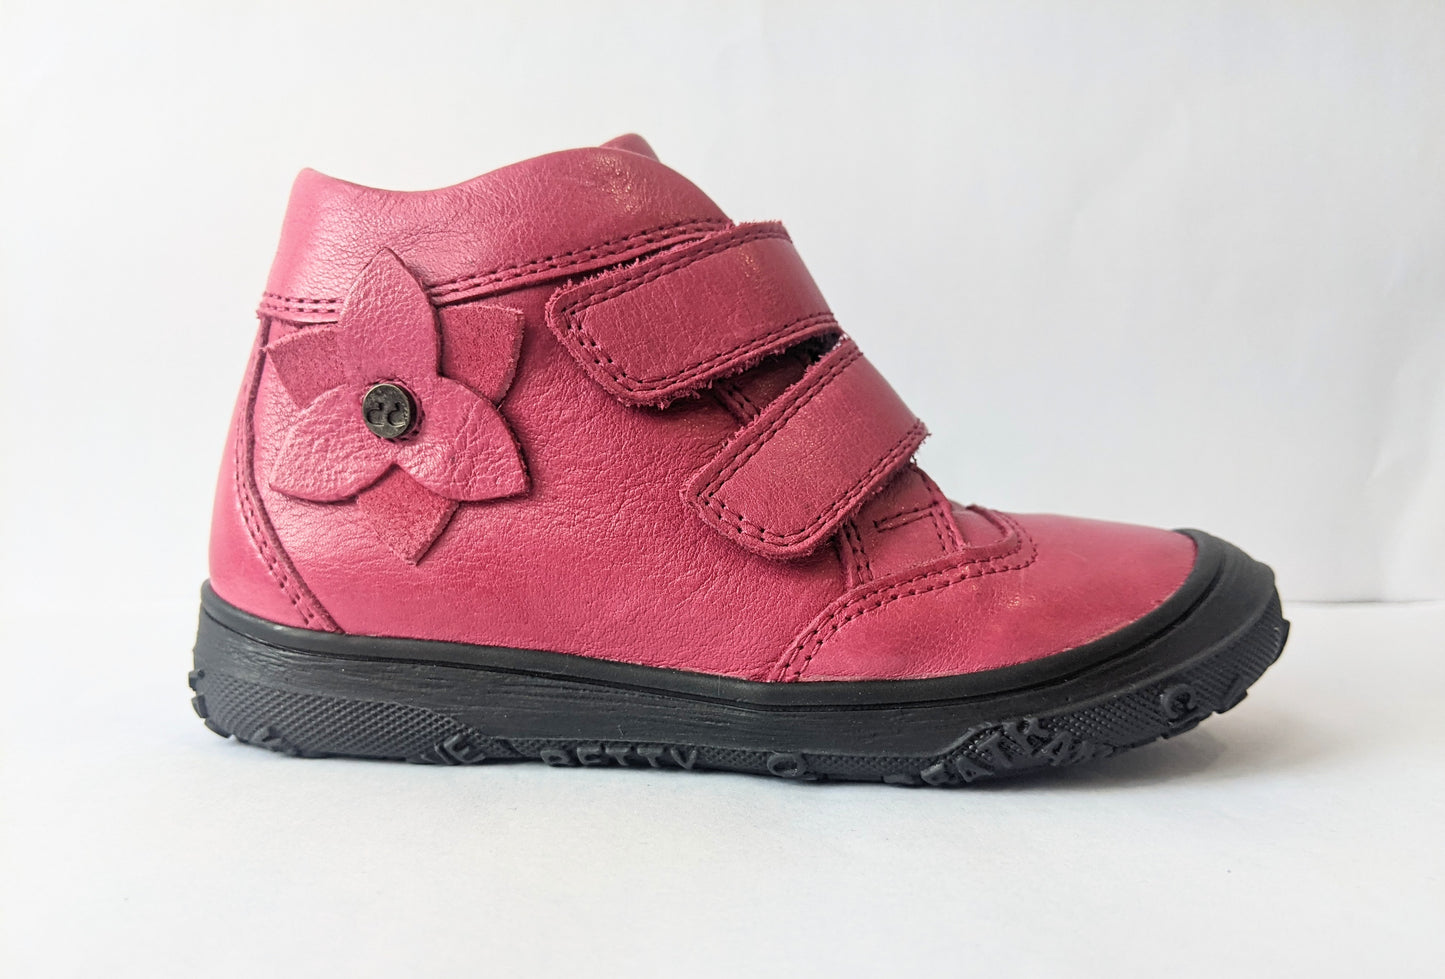 A girls ankle boot by Froddo, style G2130072, in Fuchsia leather with double velcro fatening. Right side view.